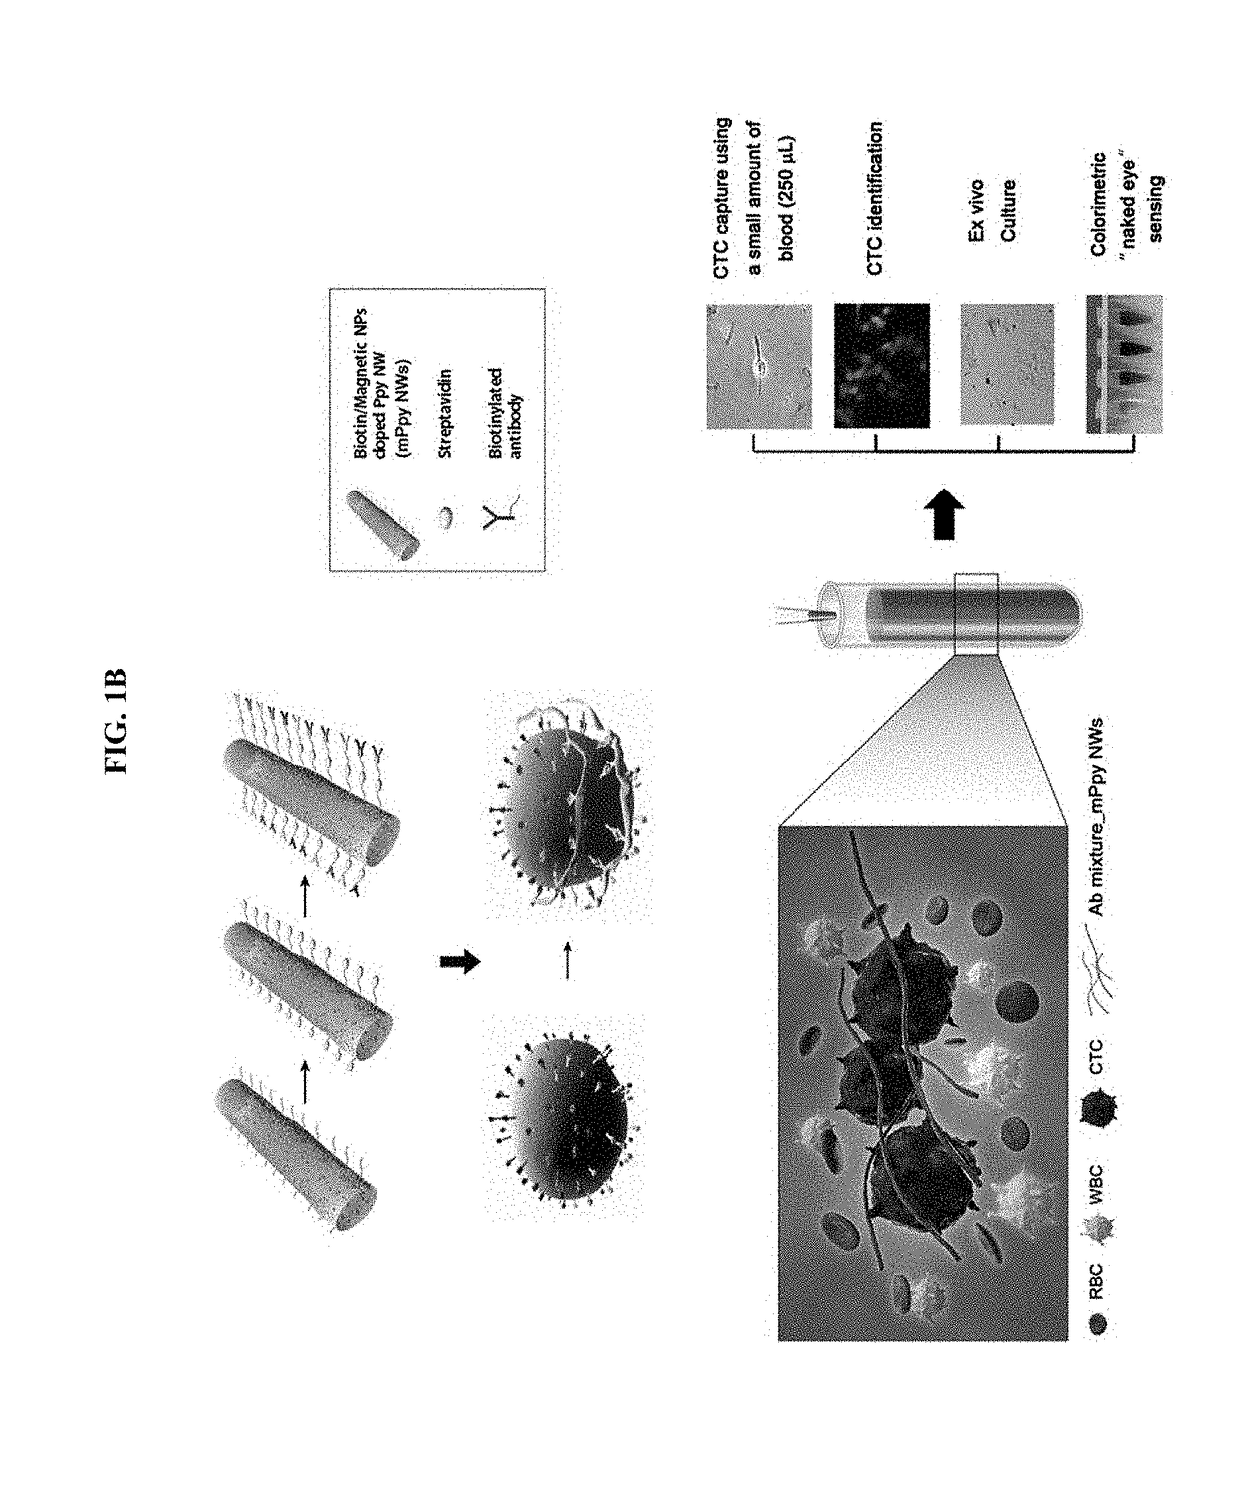 Magnetic nanostructure for detecting and isolating circulating tumor cells comprising antibody- and magnetic nanoparticle-conjugated conductive polymer